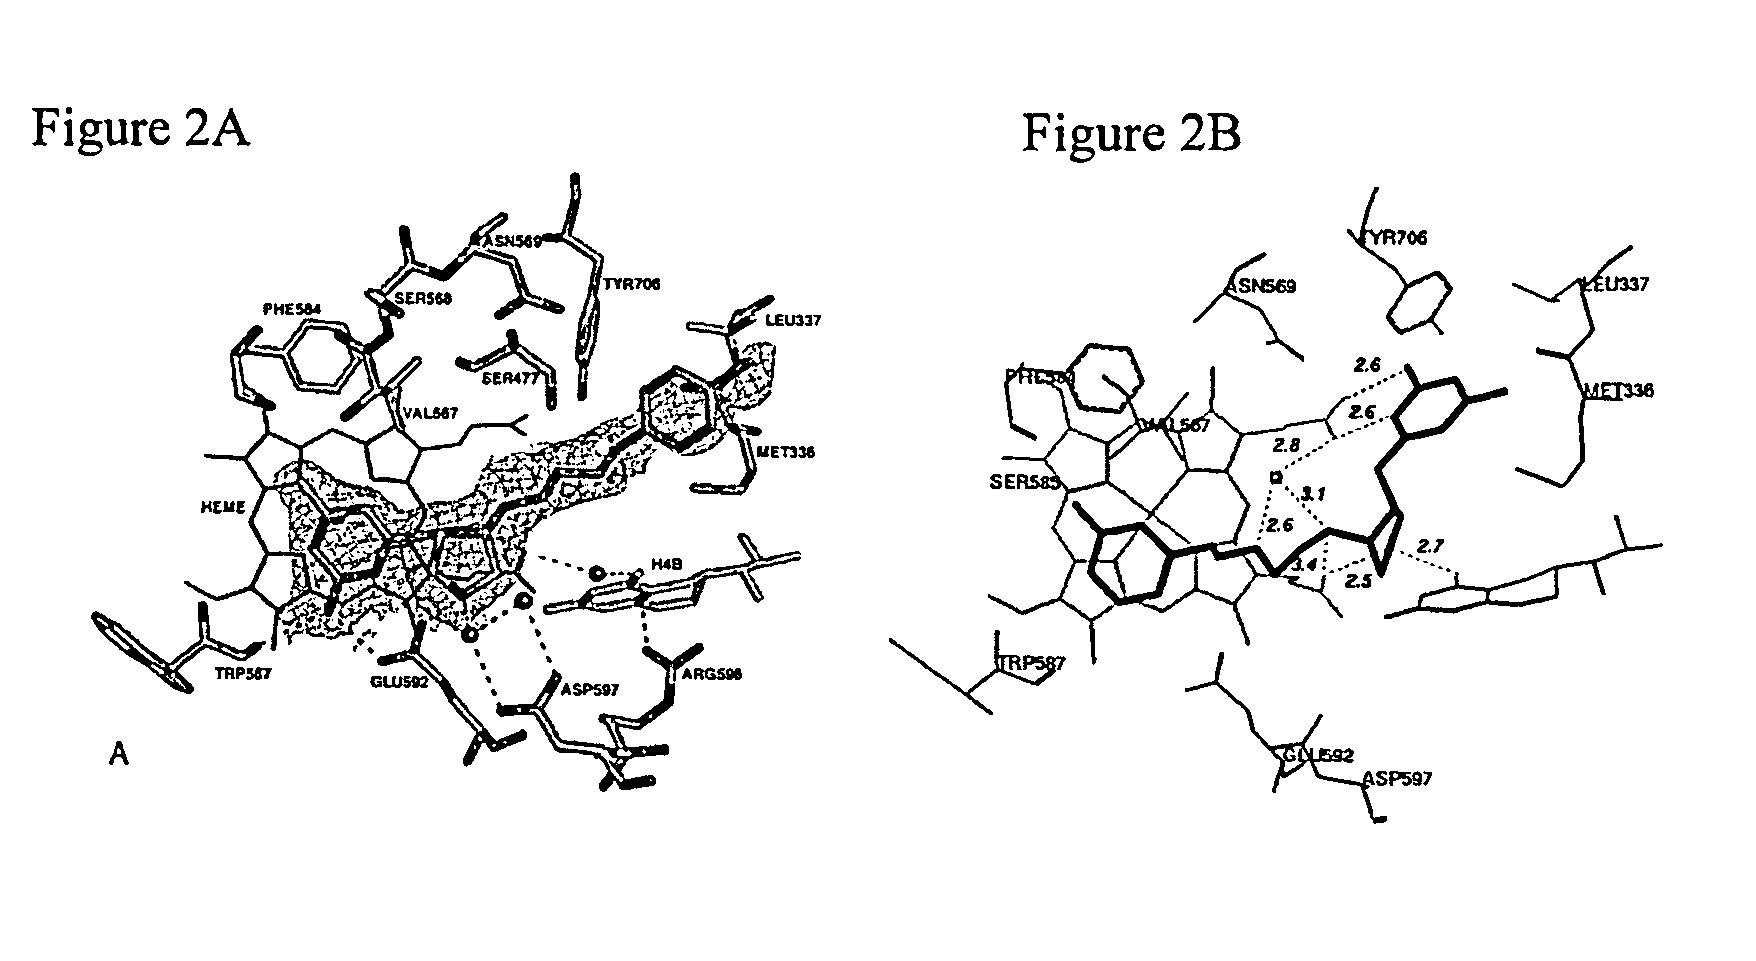 Aminopyridine dimer compounds, compositions and related methods for neuronal nitric oxide synthase inhibition